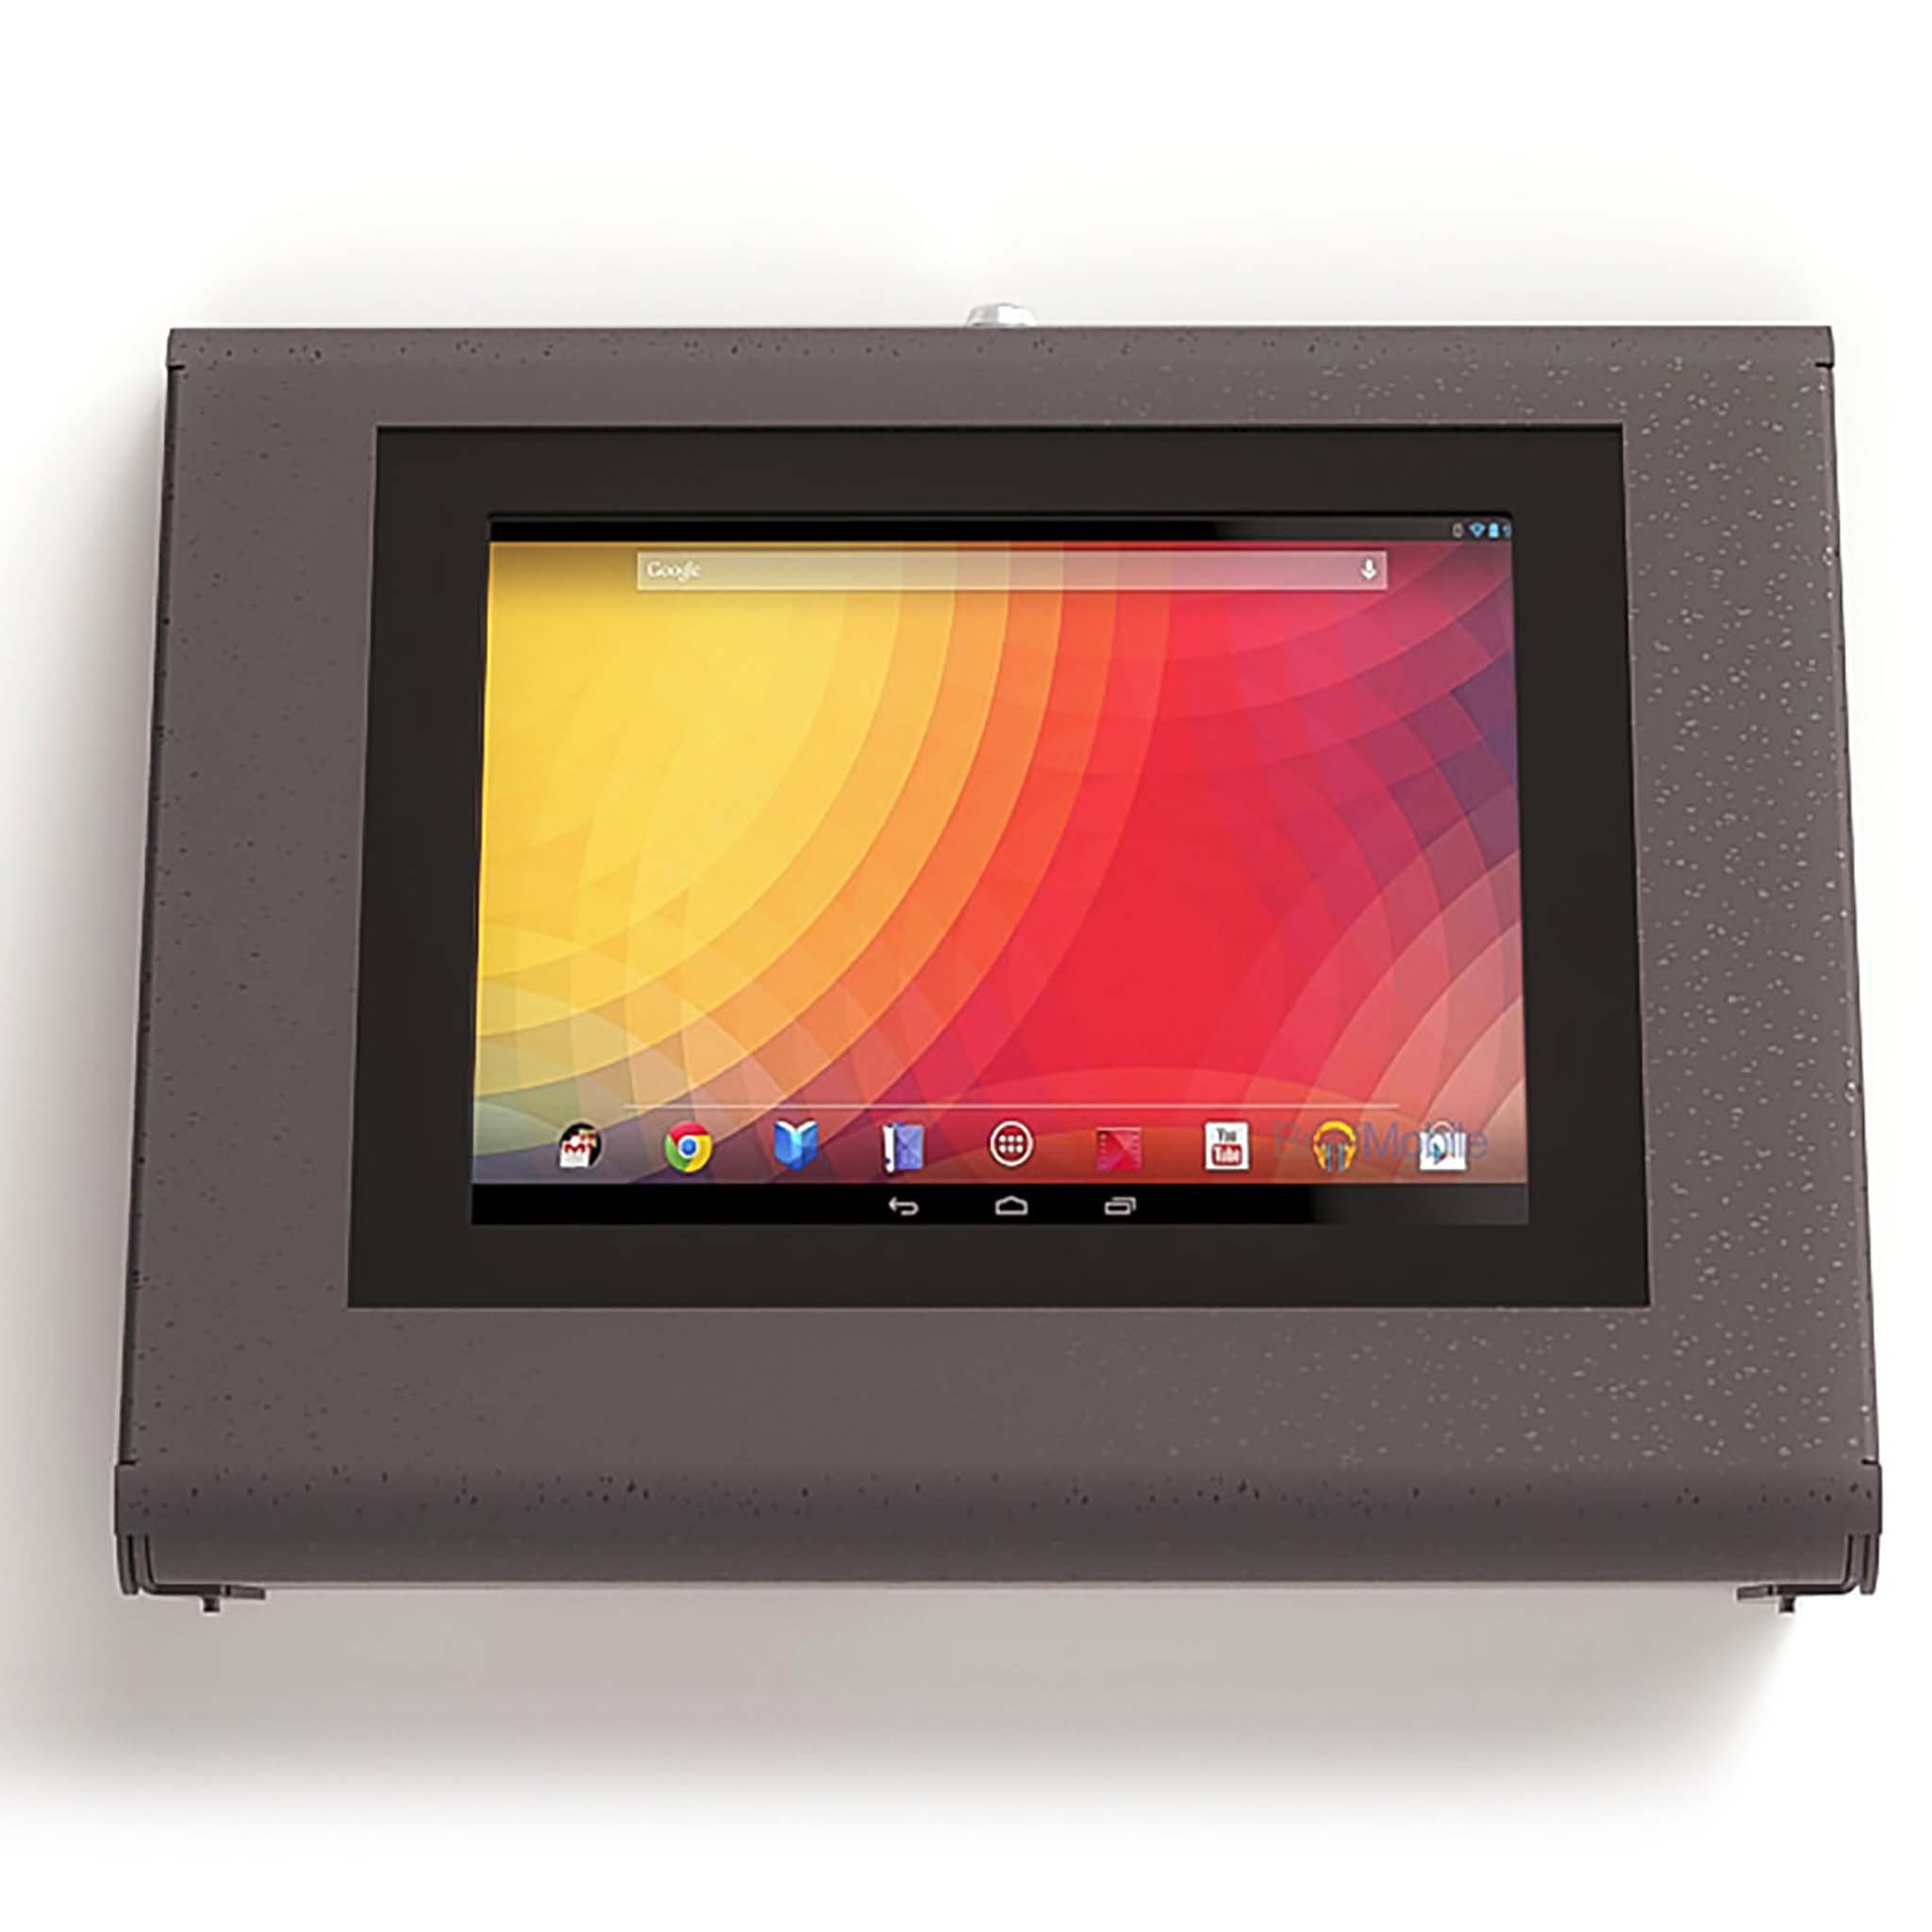 Grey Keyo surface and wall mounted tablet enclosure with tablet screen interface.